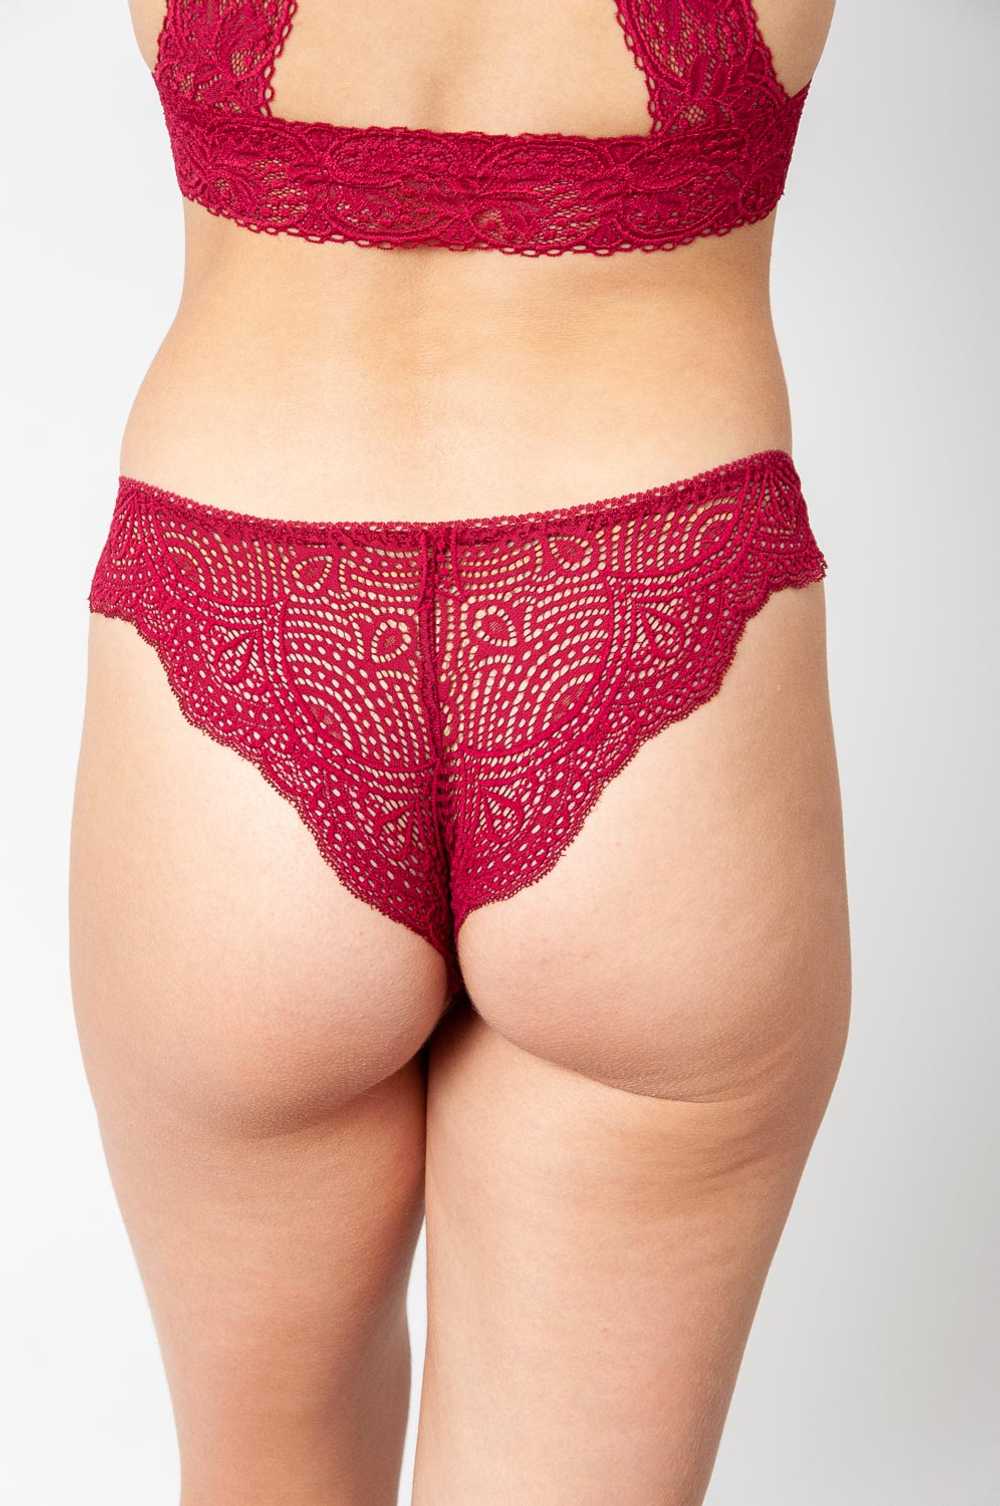 Körbchen Slip Made Of Recycled Lace “Helena” Red - image 4